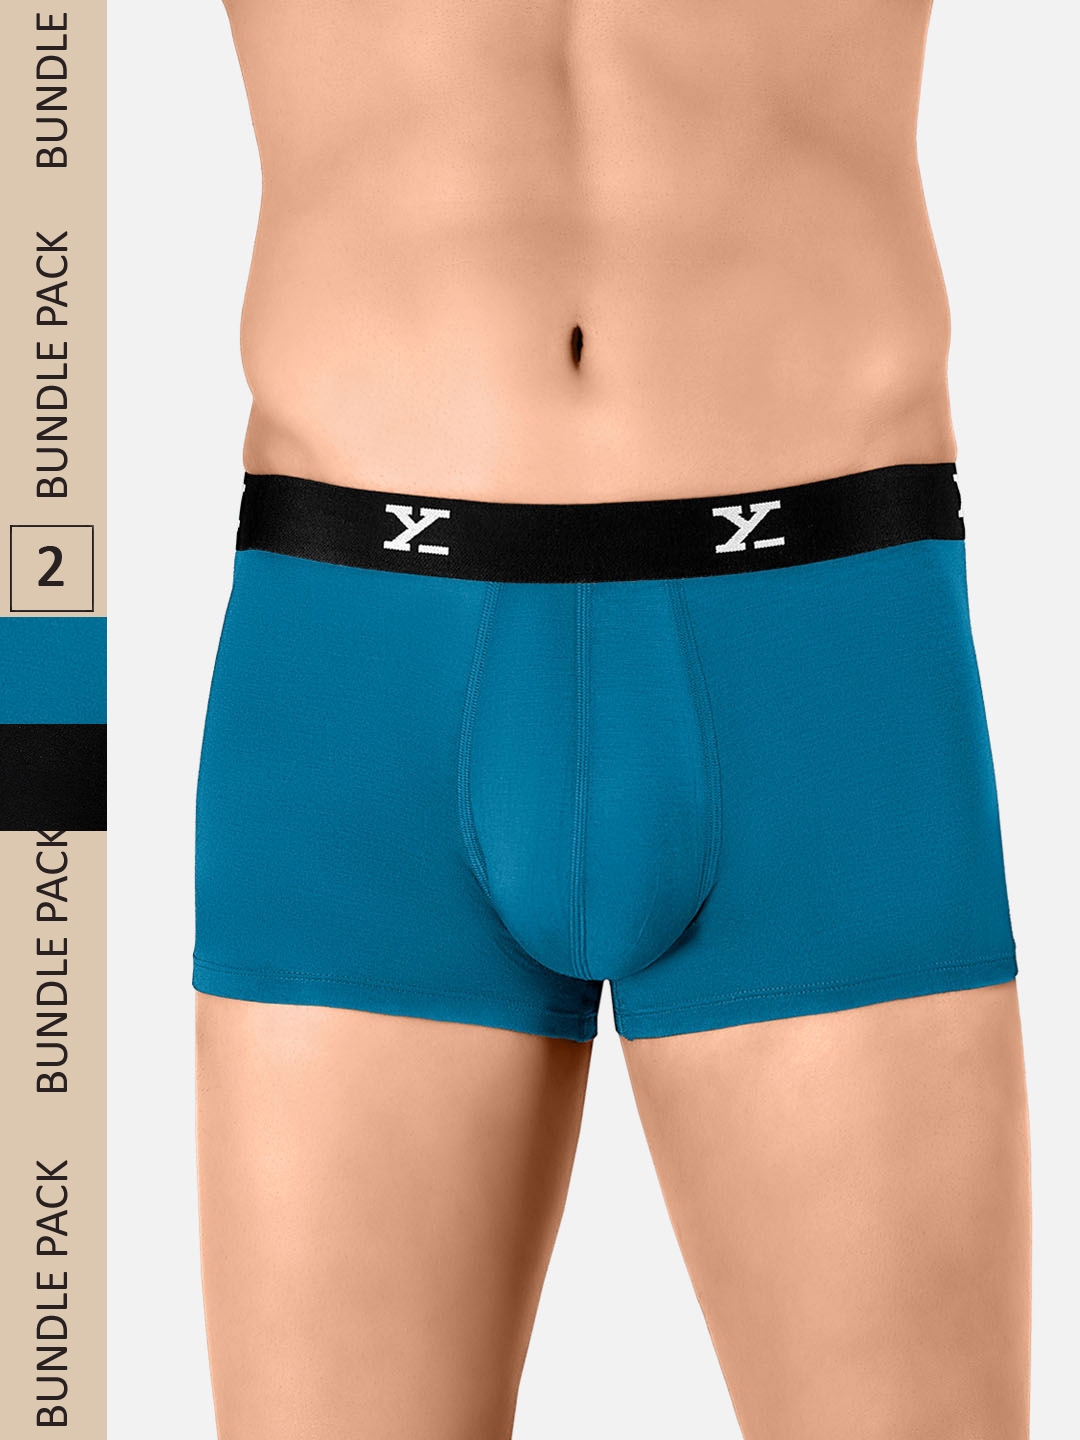 Buy XYXX Men Pack Of 2 IntelliSoft Antimicrobial Micro Modal Ace Trunks  XYTRNK2PCK06 - Trunk for Men 1670140